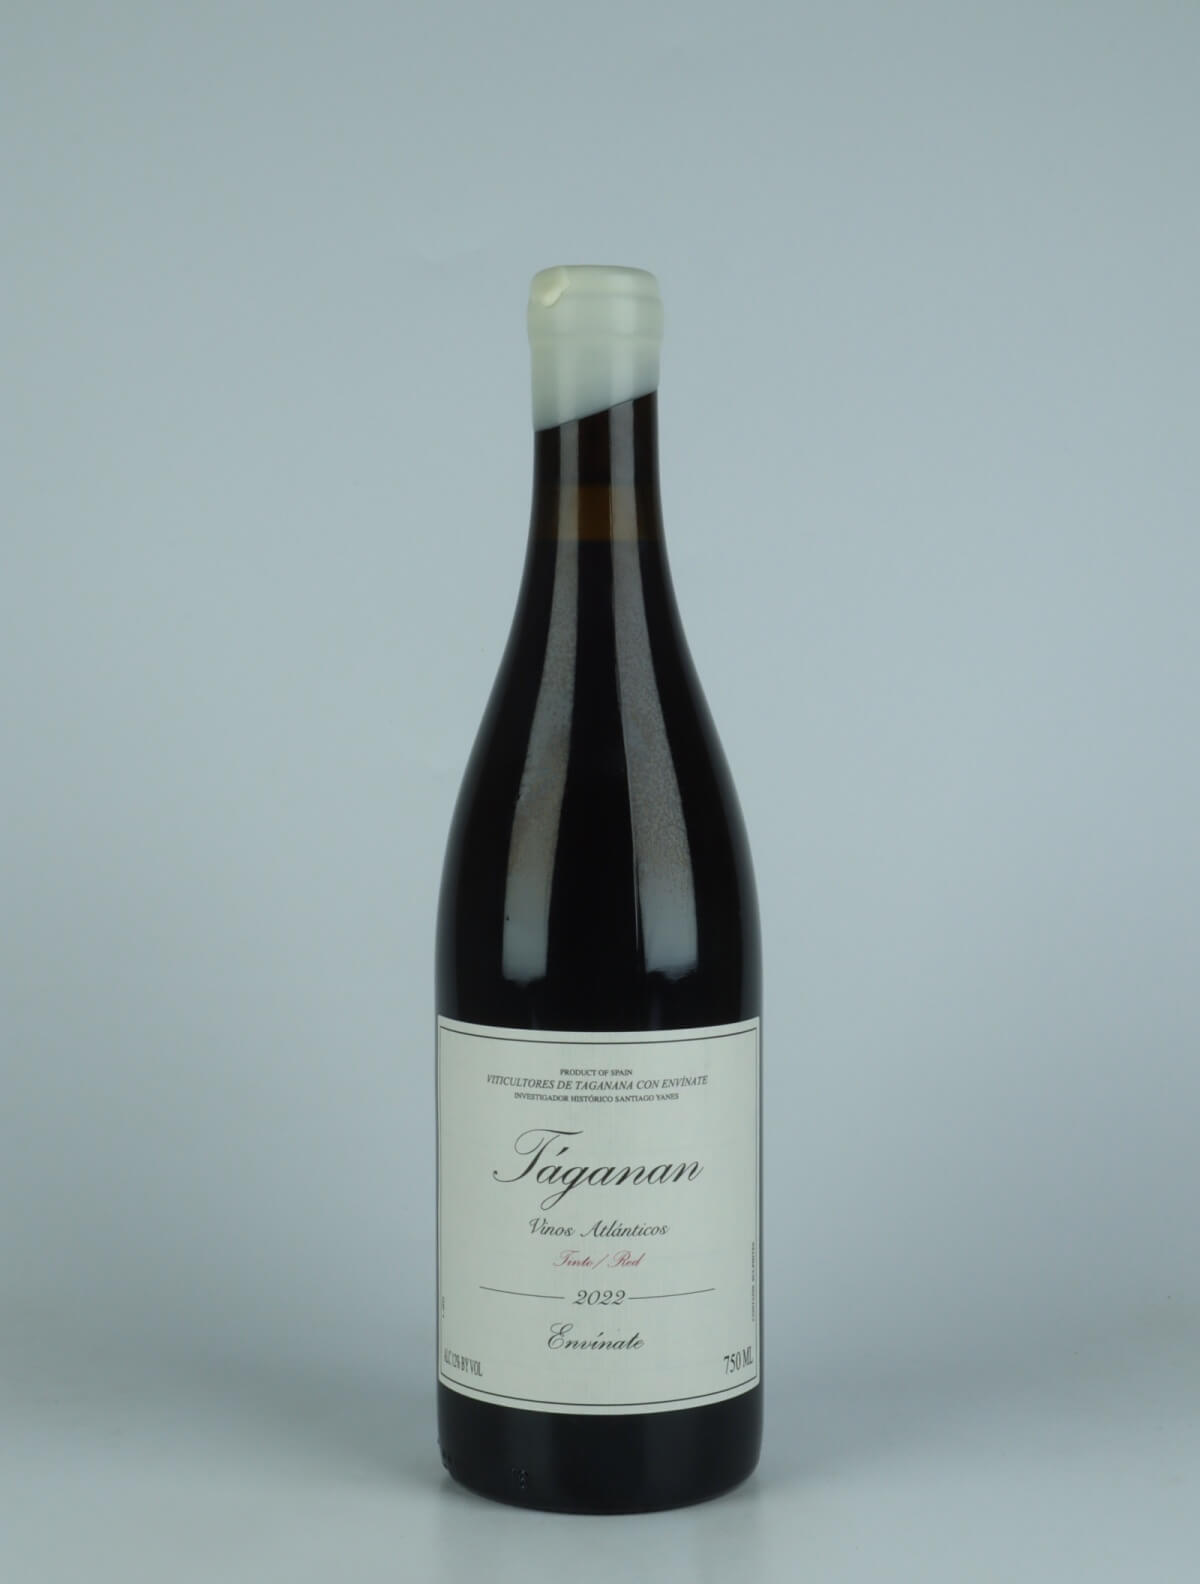 A bottle 2022 Taganan Tinto - Tenerife Red wine from Envínate,  in Spain